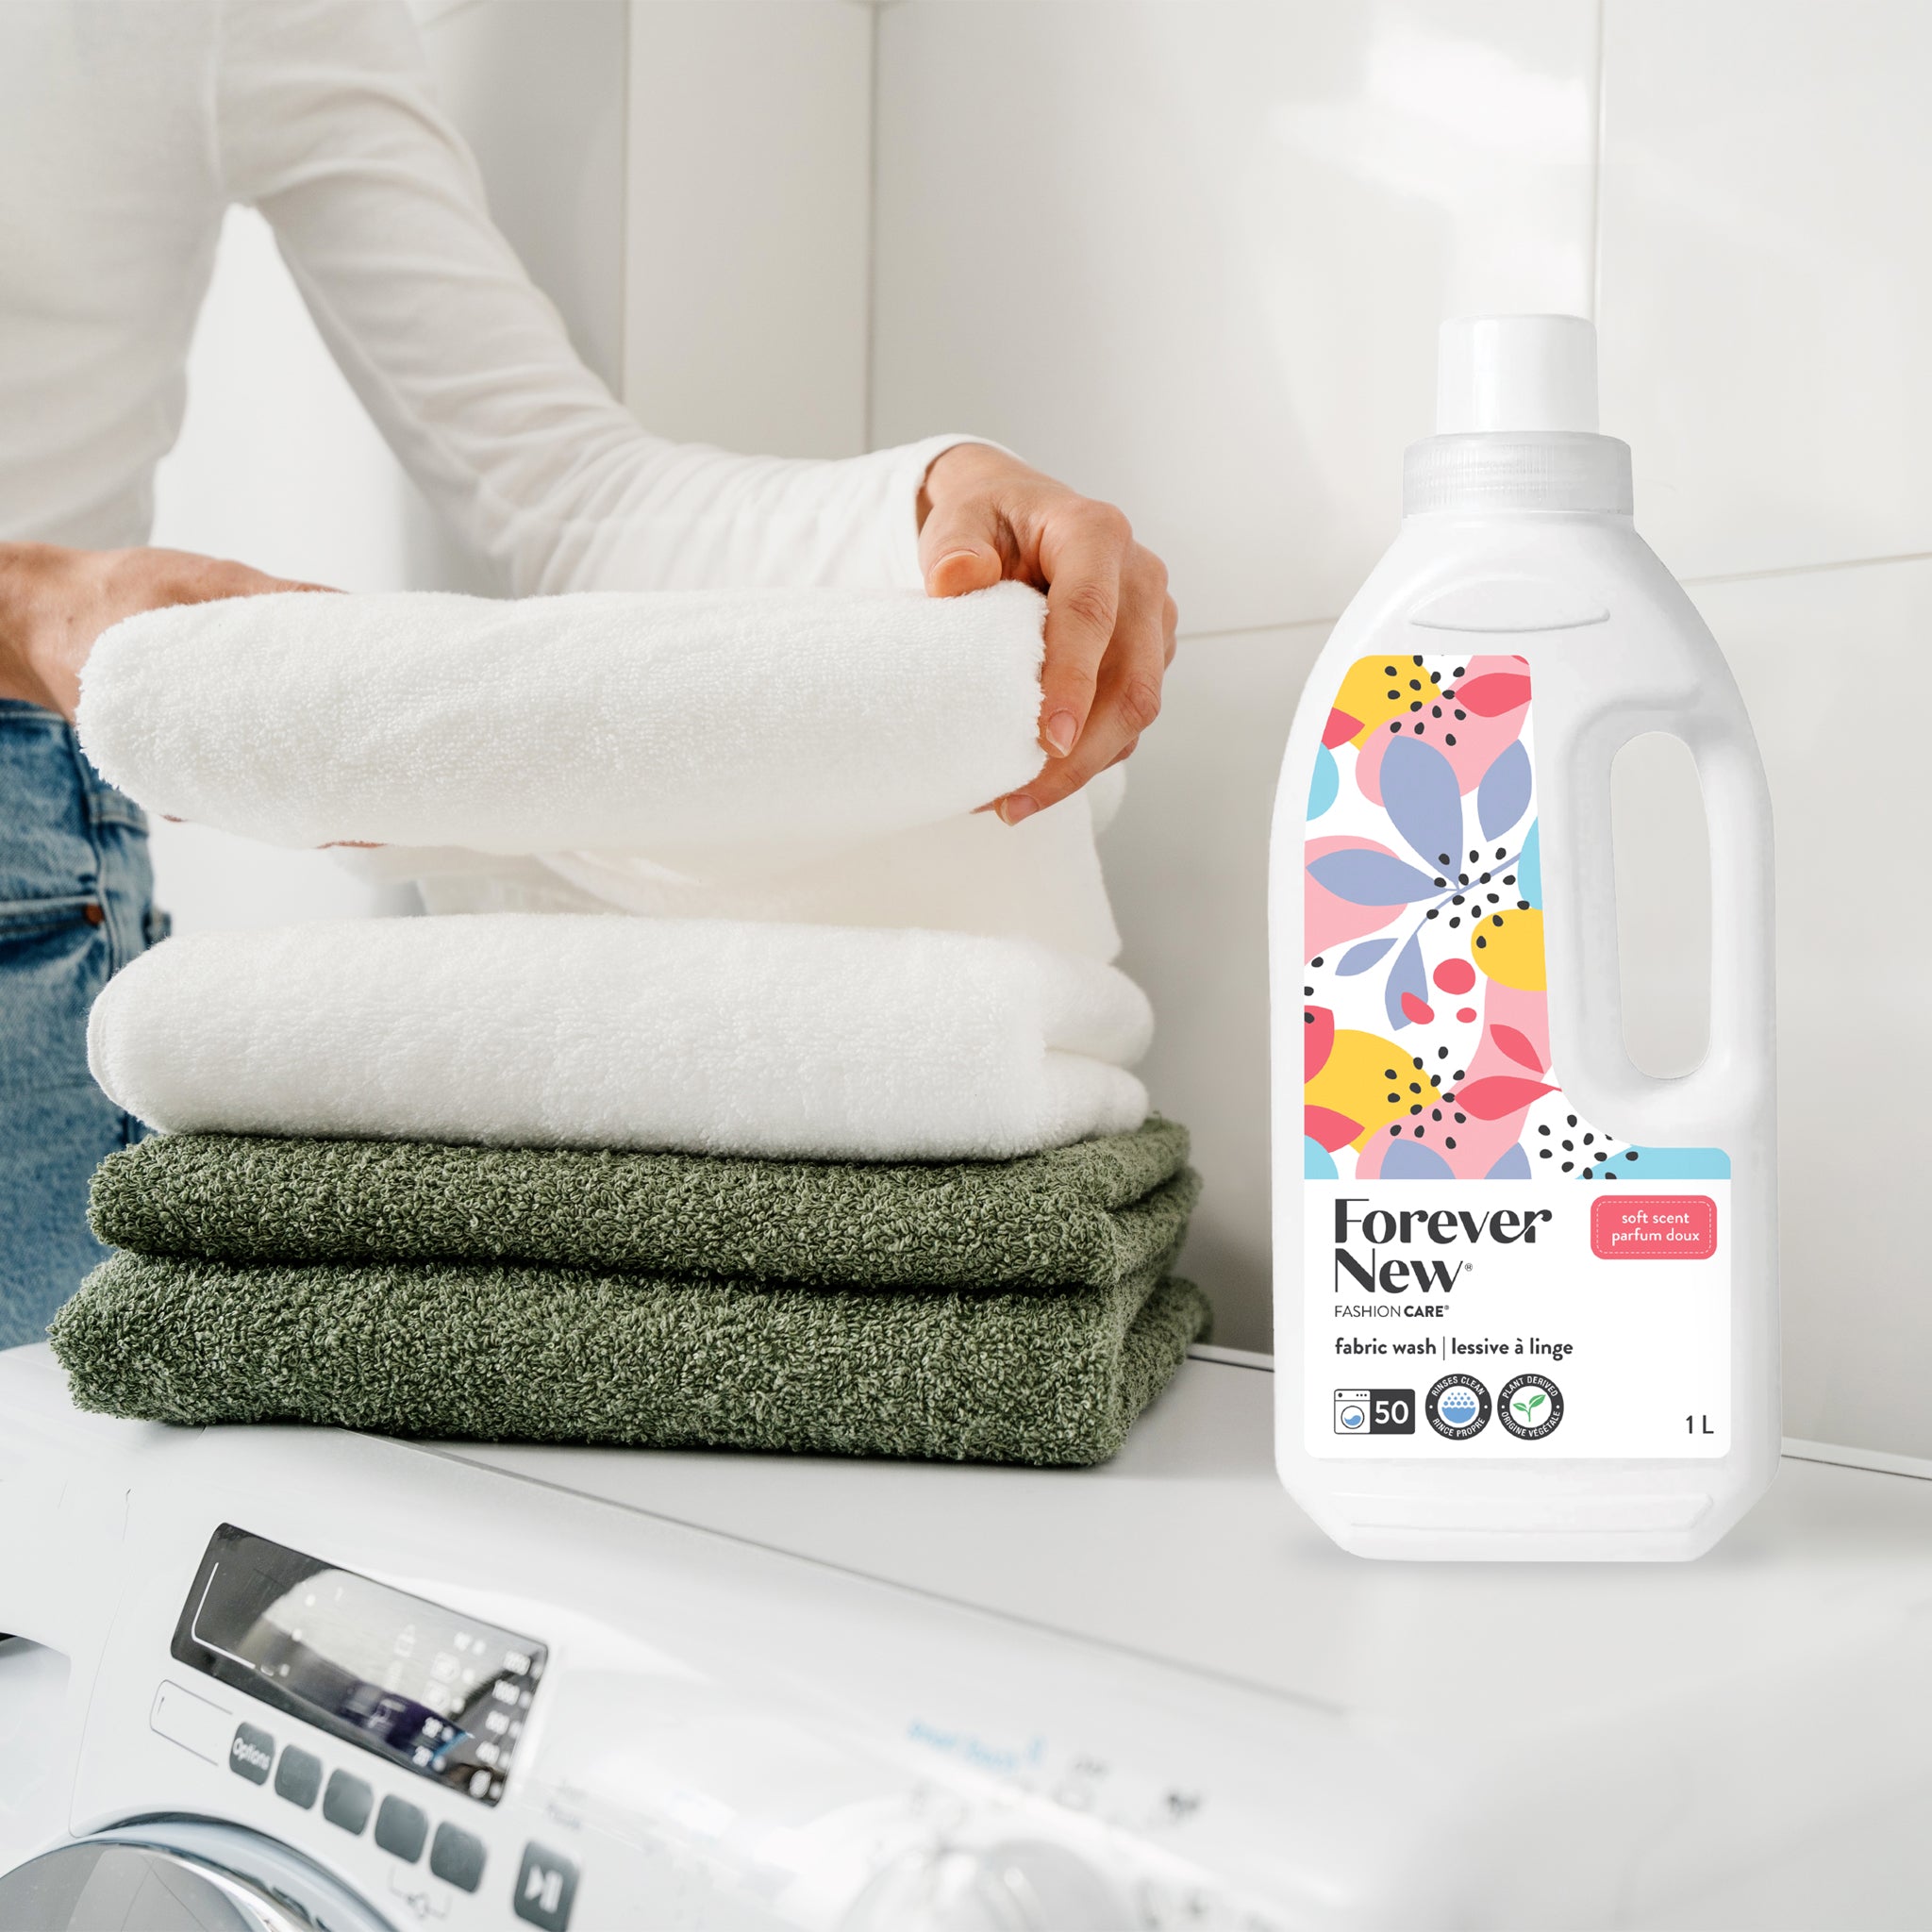 Forever New, Natural Laundry Detergent